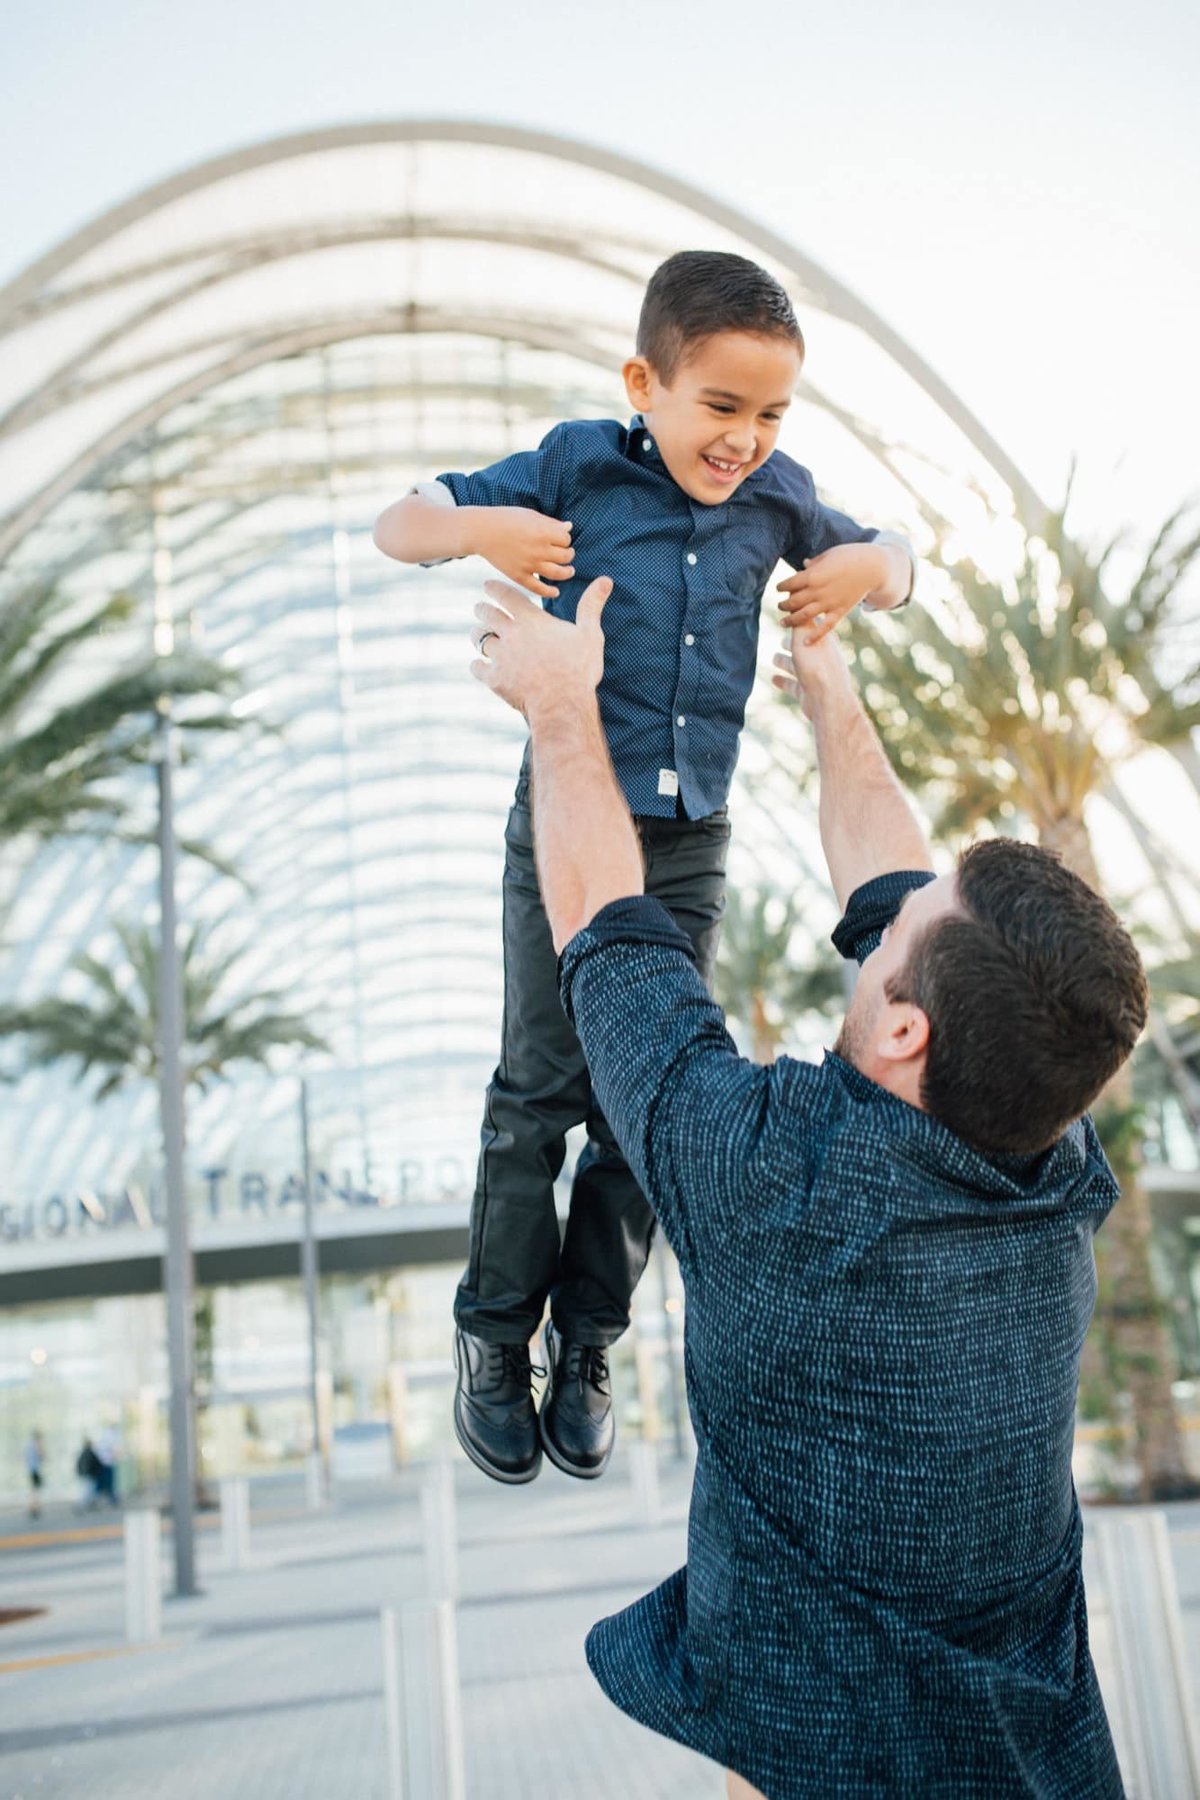 Dad tosses his young son in the air outside the ARTIC Train Station in Anaheim